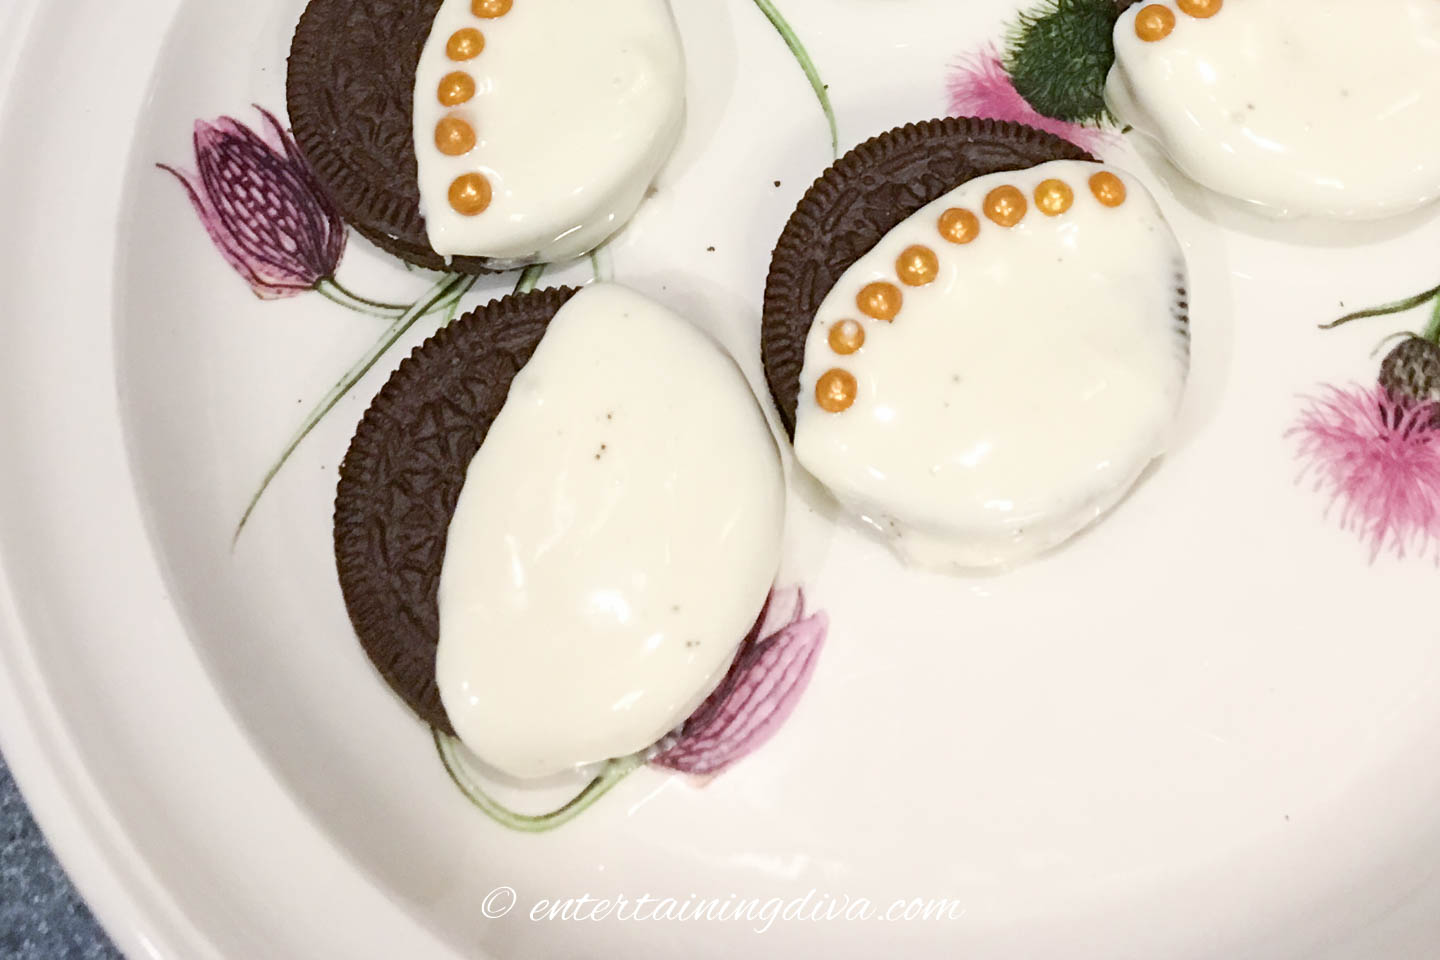 Oreos dipped in white chocolate on a plate